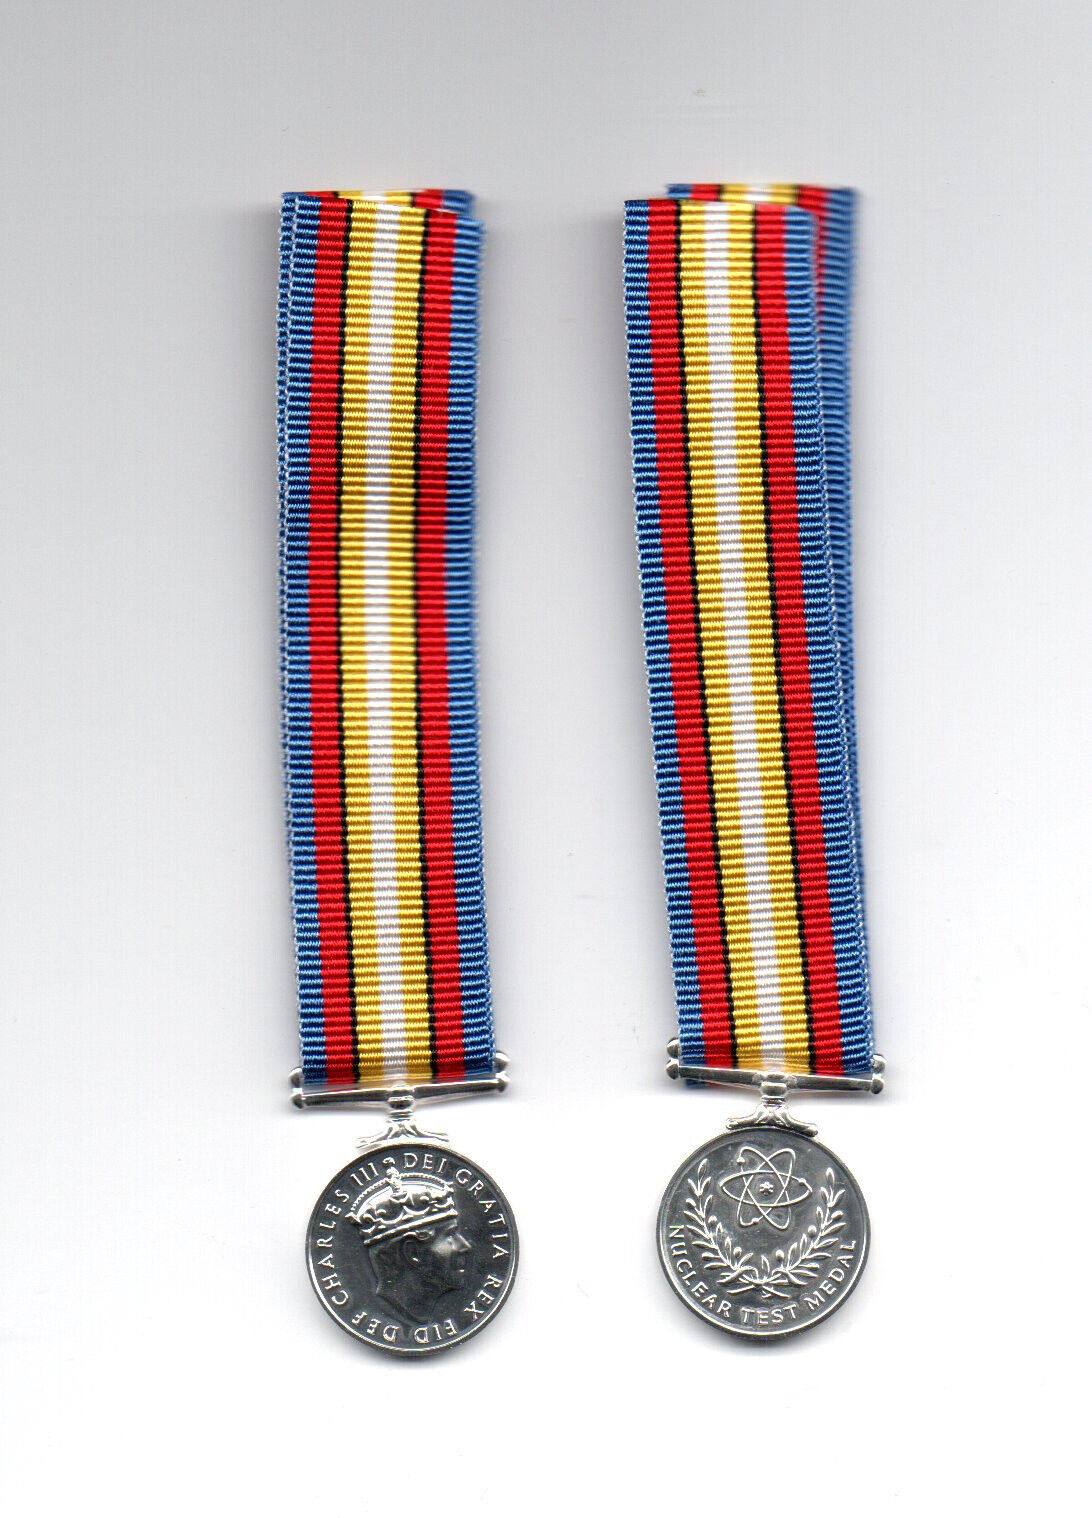 BRITISH NUCLEAR TEST VETERANS MEDAL. A SUPERB MINIATURE MEDAL. *JUST RELEASED*